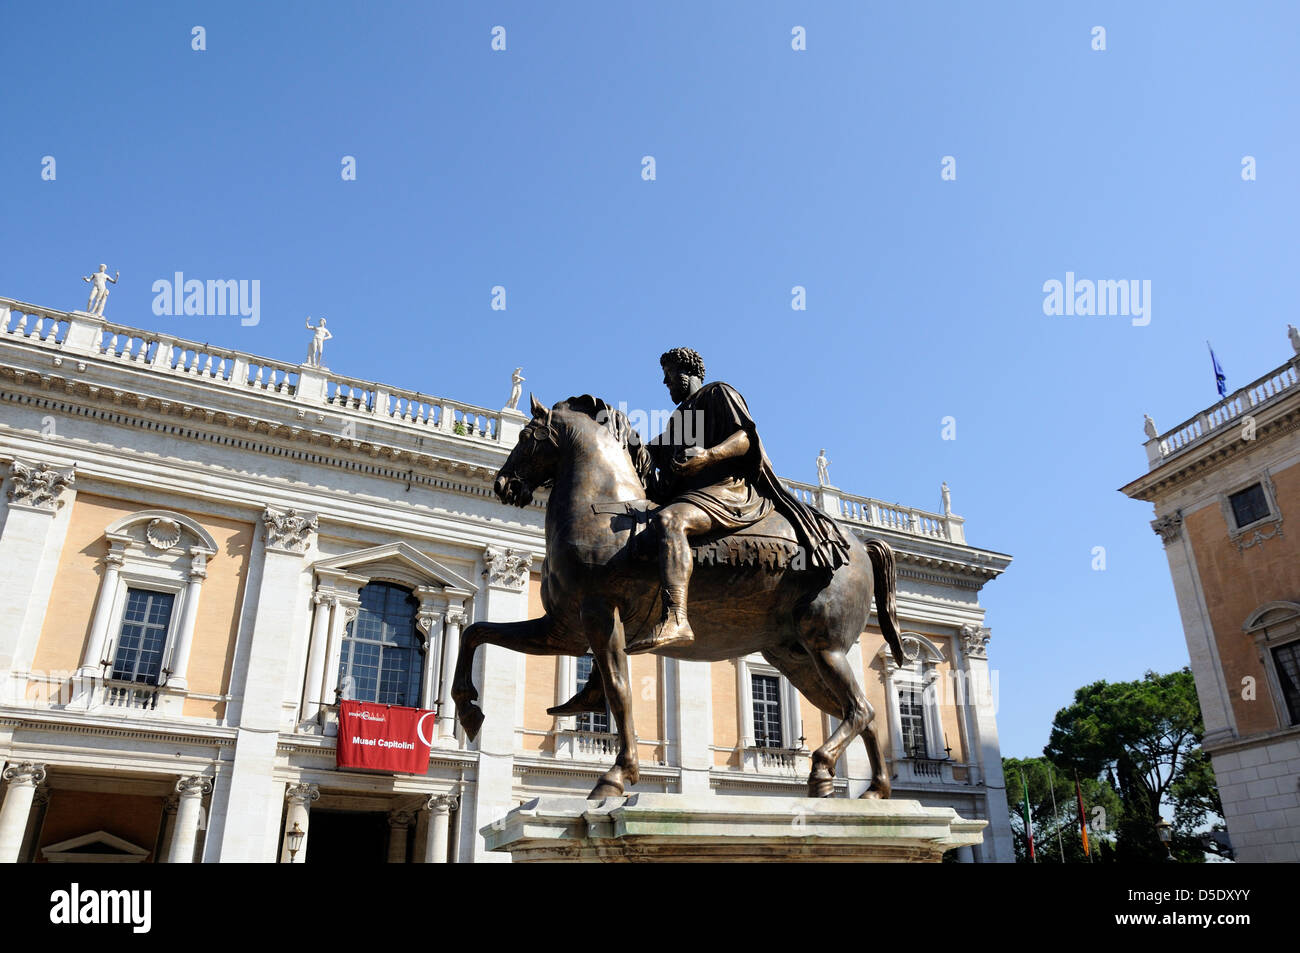 Marcus Aurelius, Roman Emperor, 161-180. This copy of a famous statue of the emperor on his horse on Capitoline Hill, Rome Stock Photo